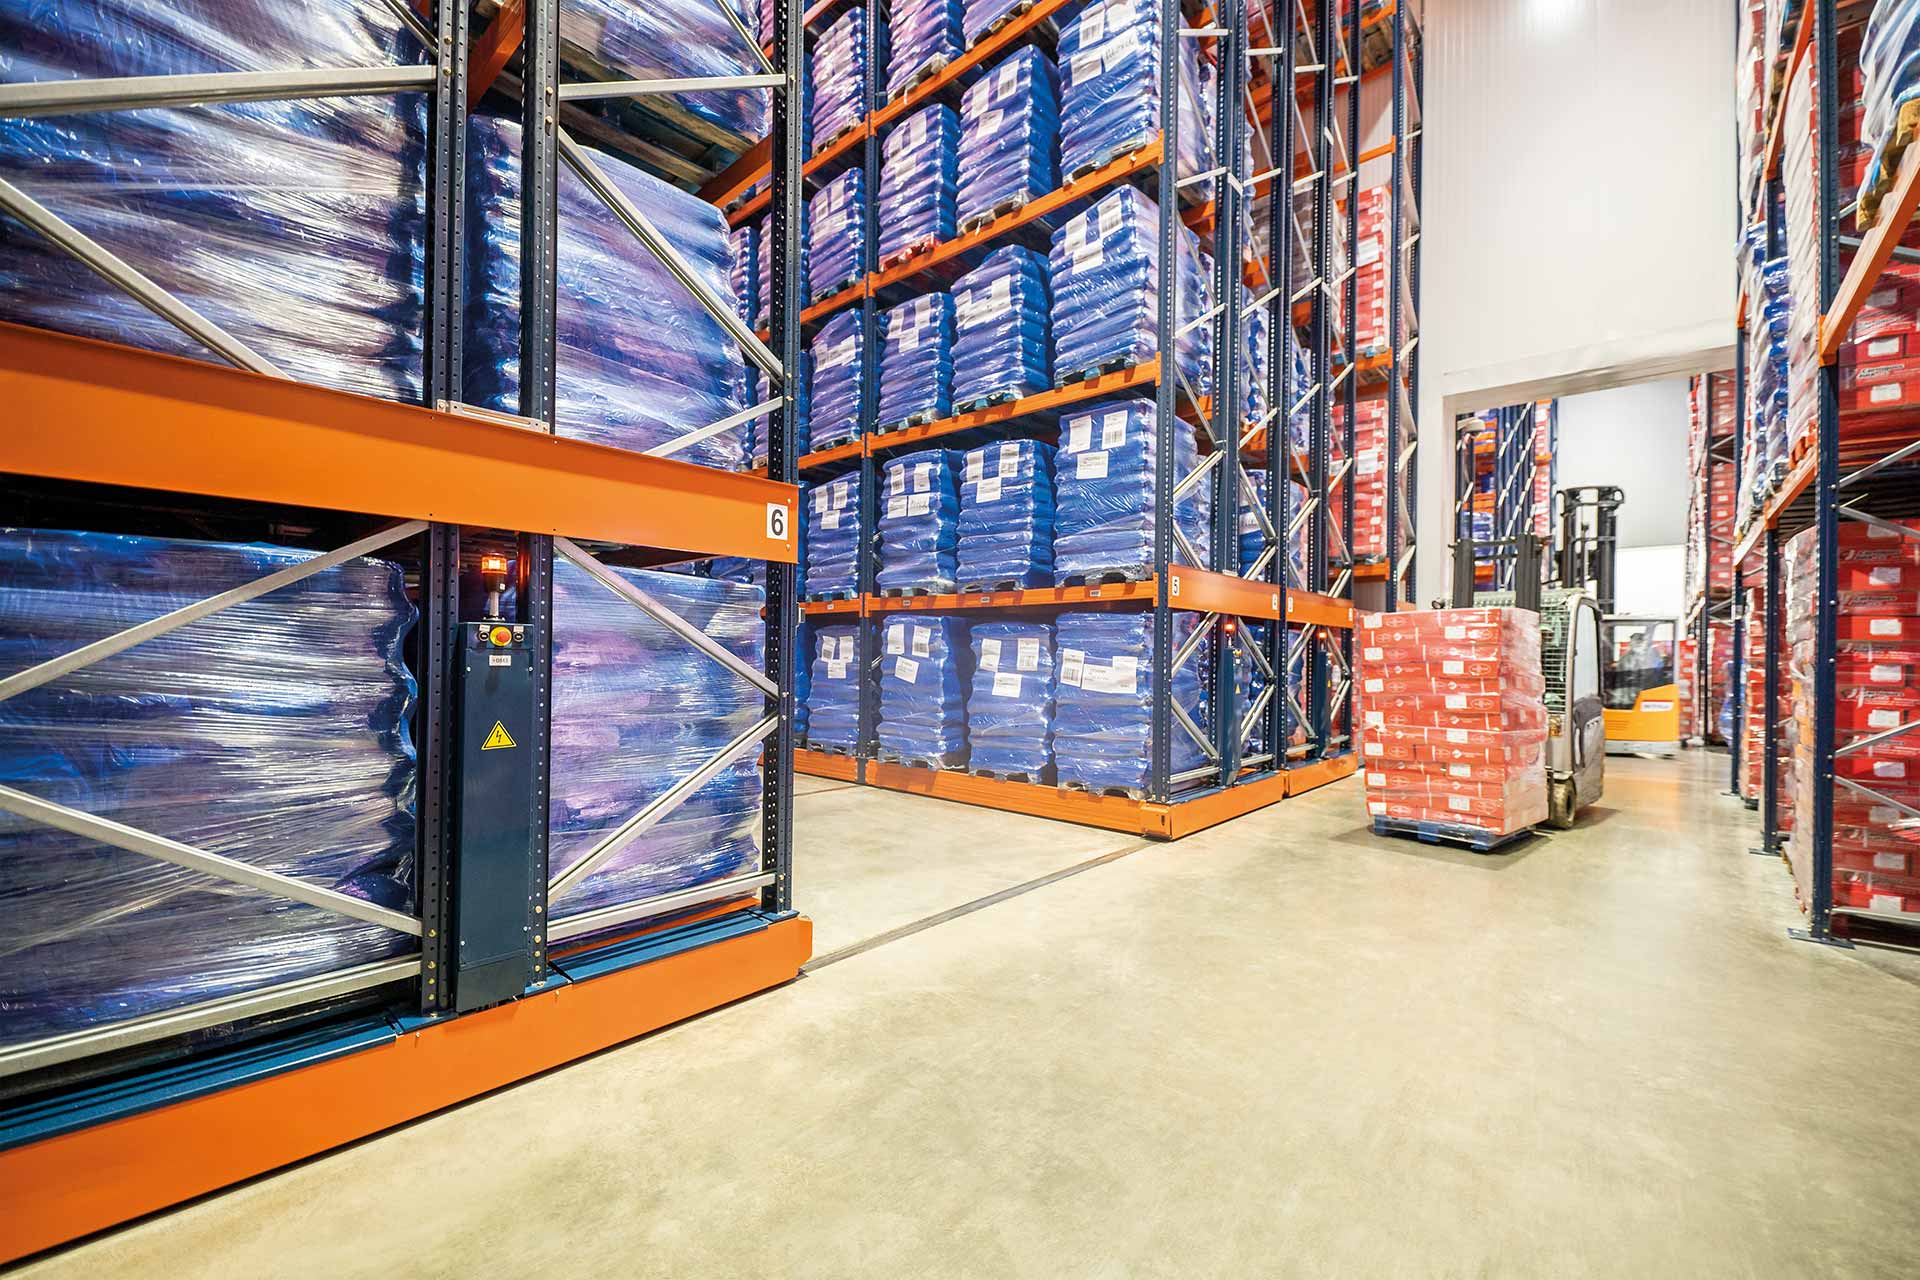 The Movirack mobile pallet rack system can be combined with pallet racking according to the demands of each warehouse